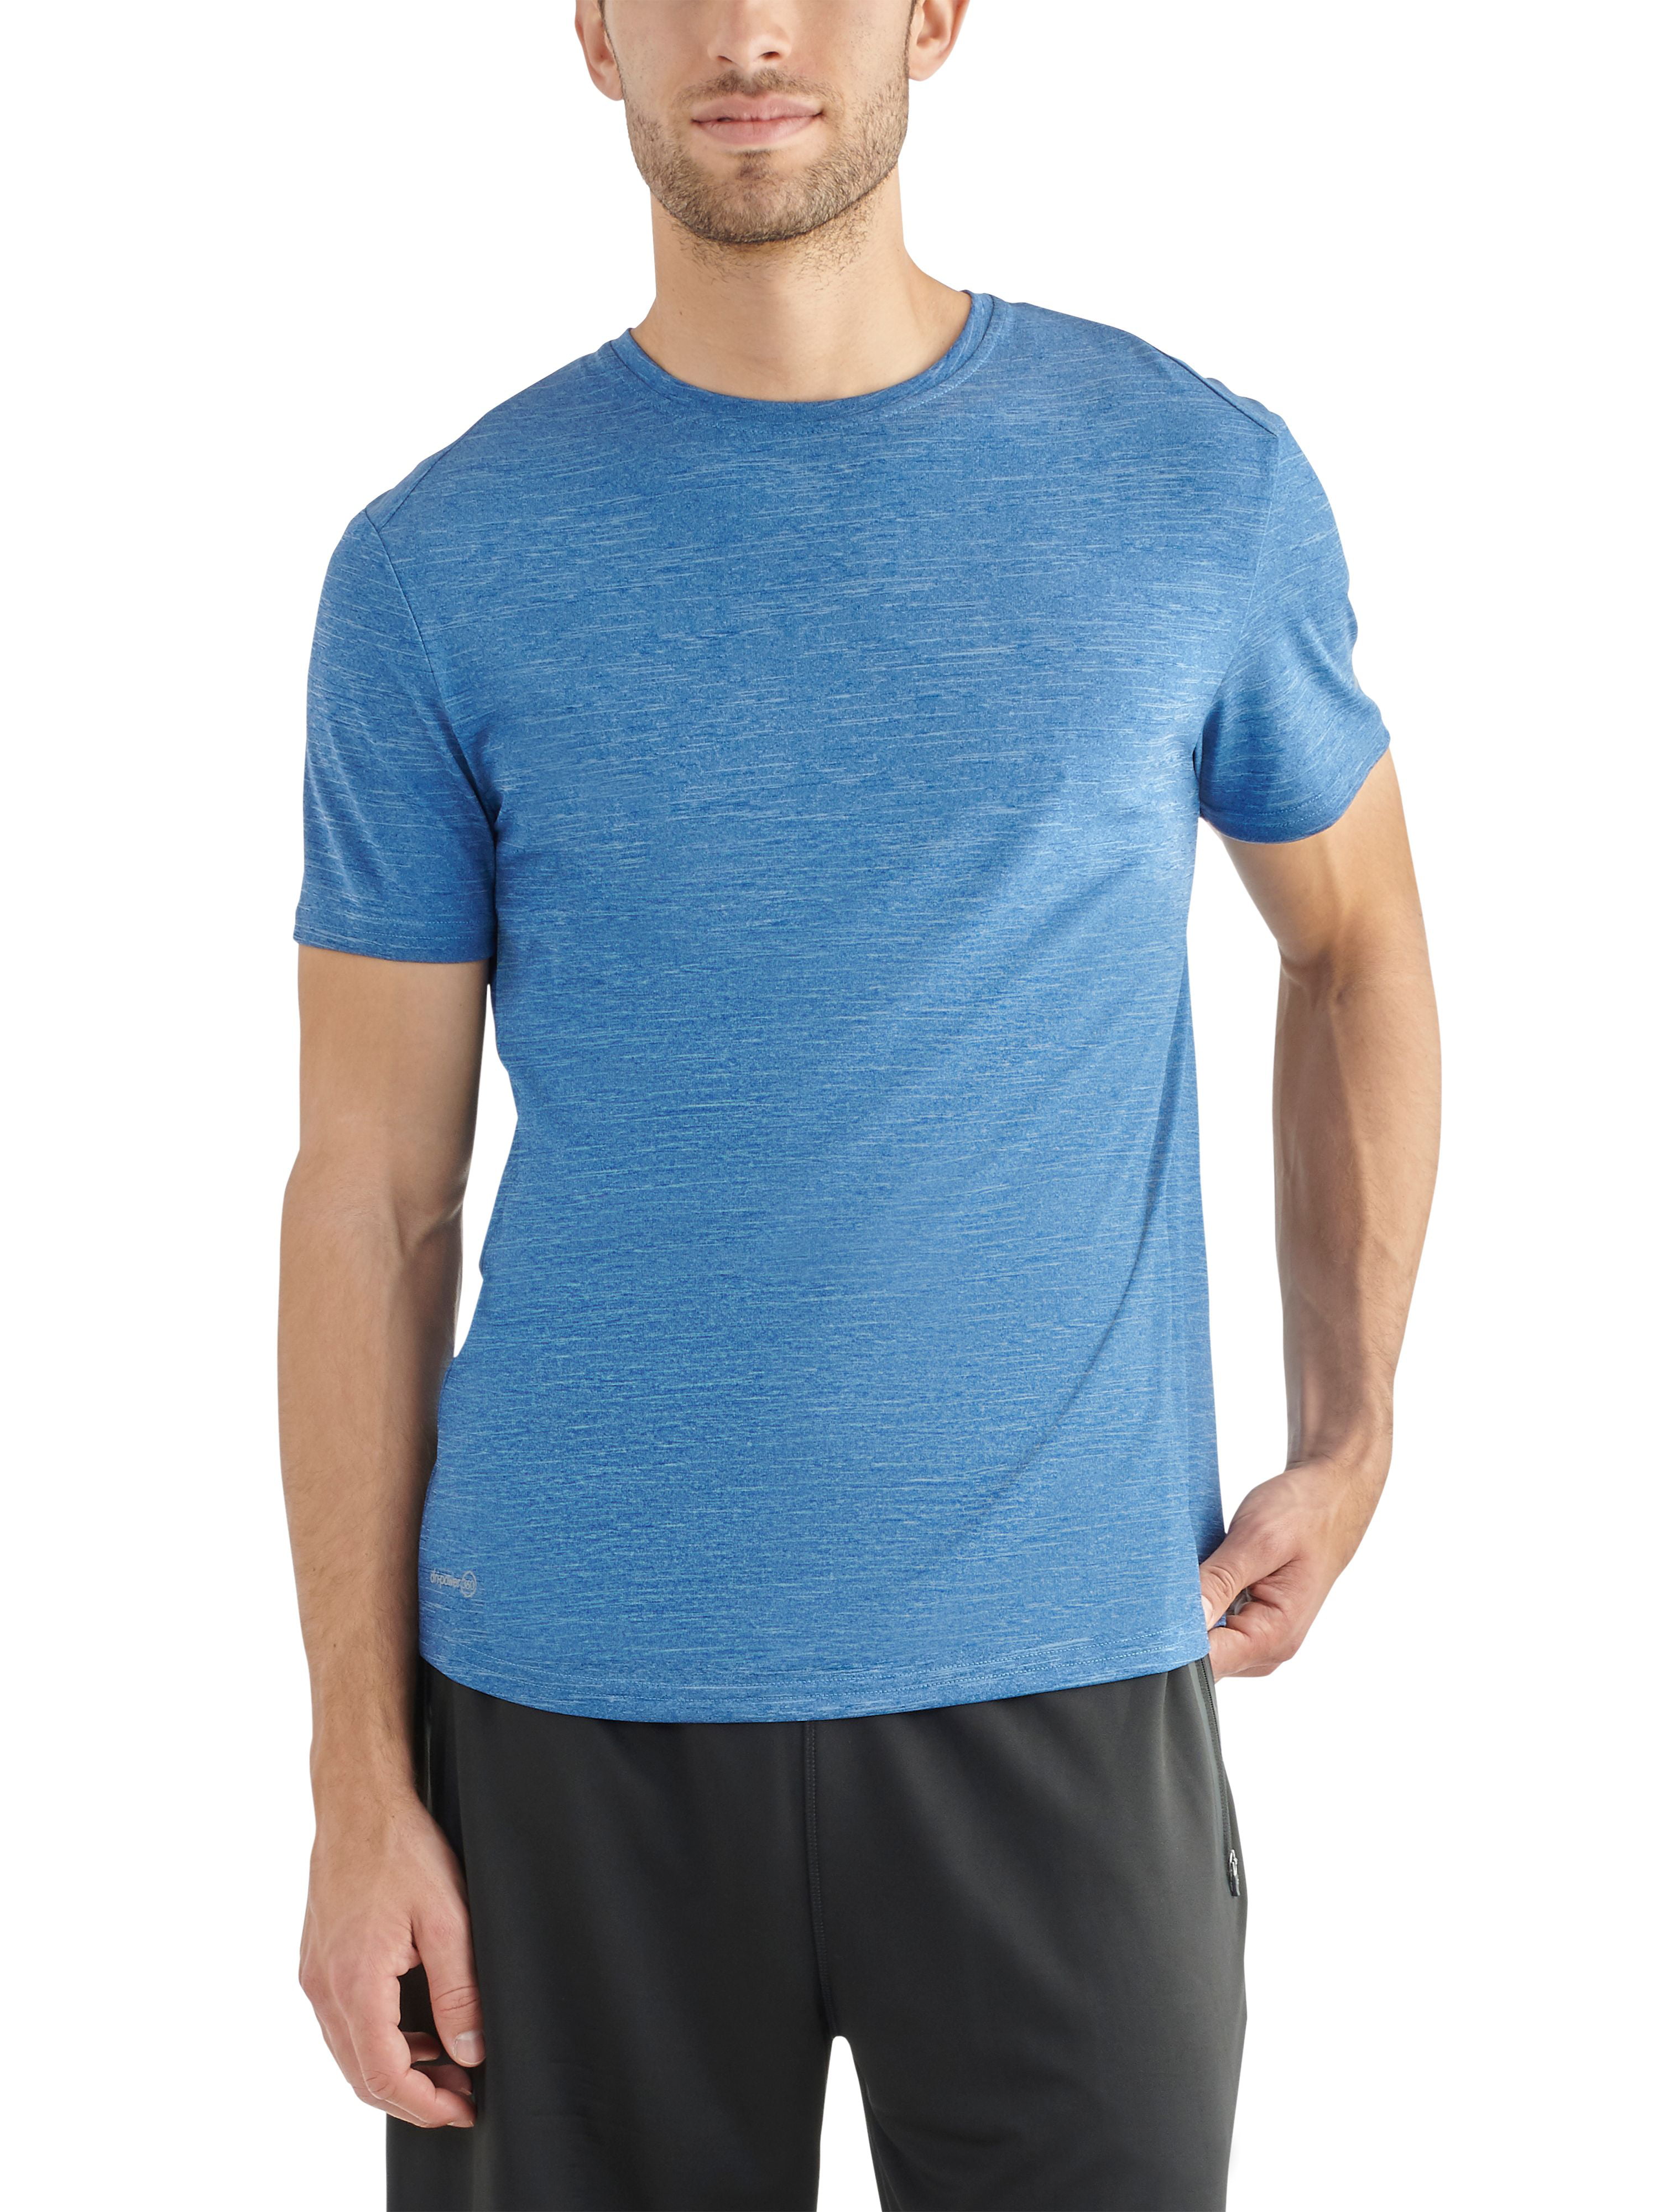 Russell Men's and Big Men's Core Performance Short Sleeve T-Shirt, up ...